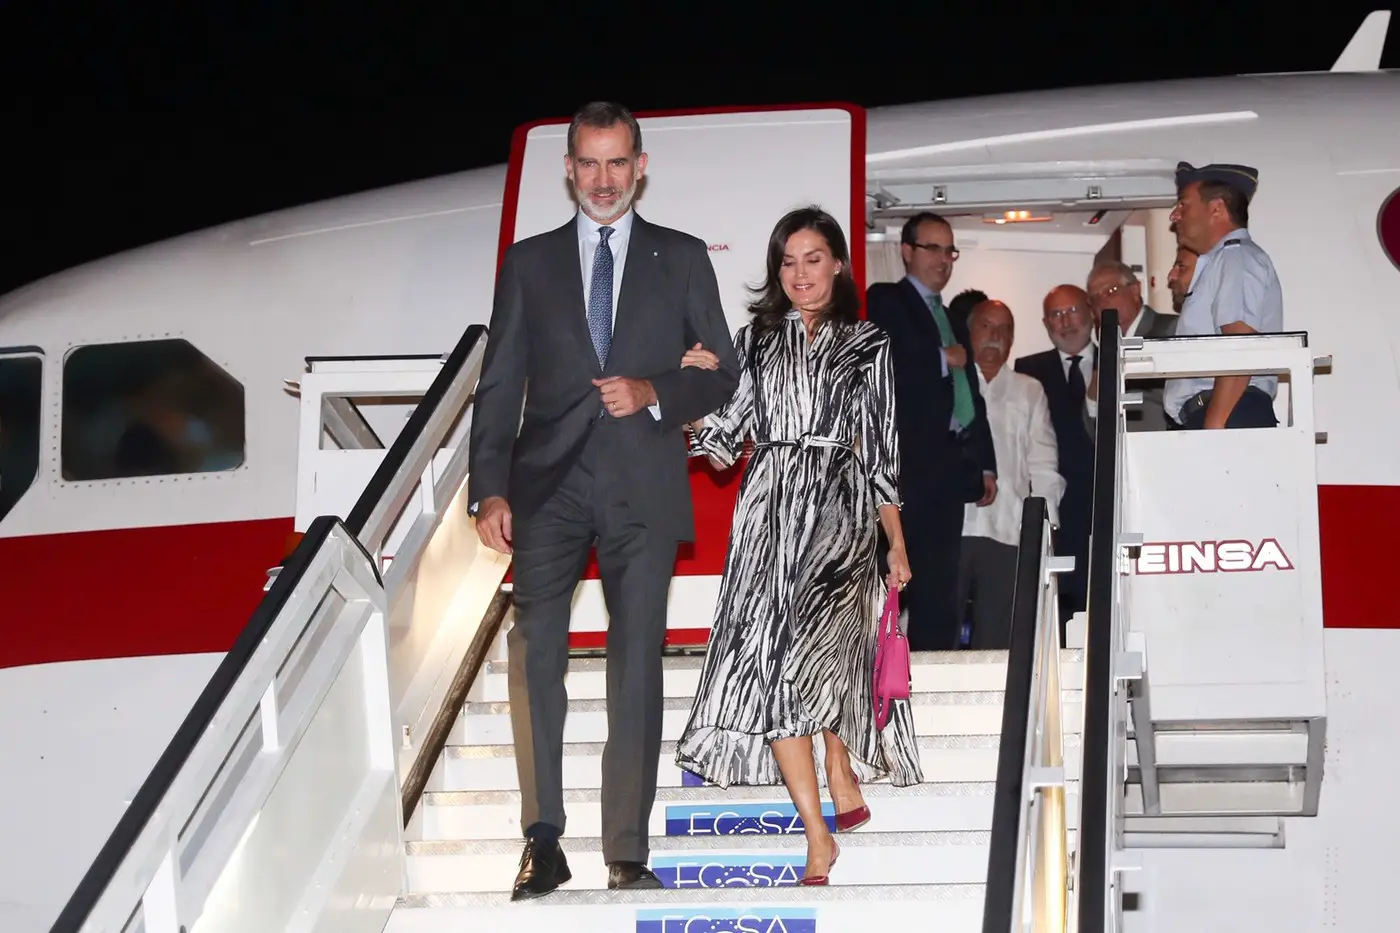 King Felipe and Queen Letizia of Spain arrived in Cuba for state visit